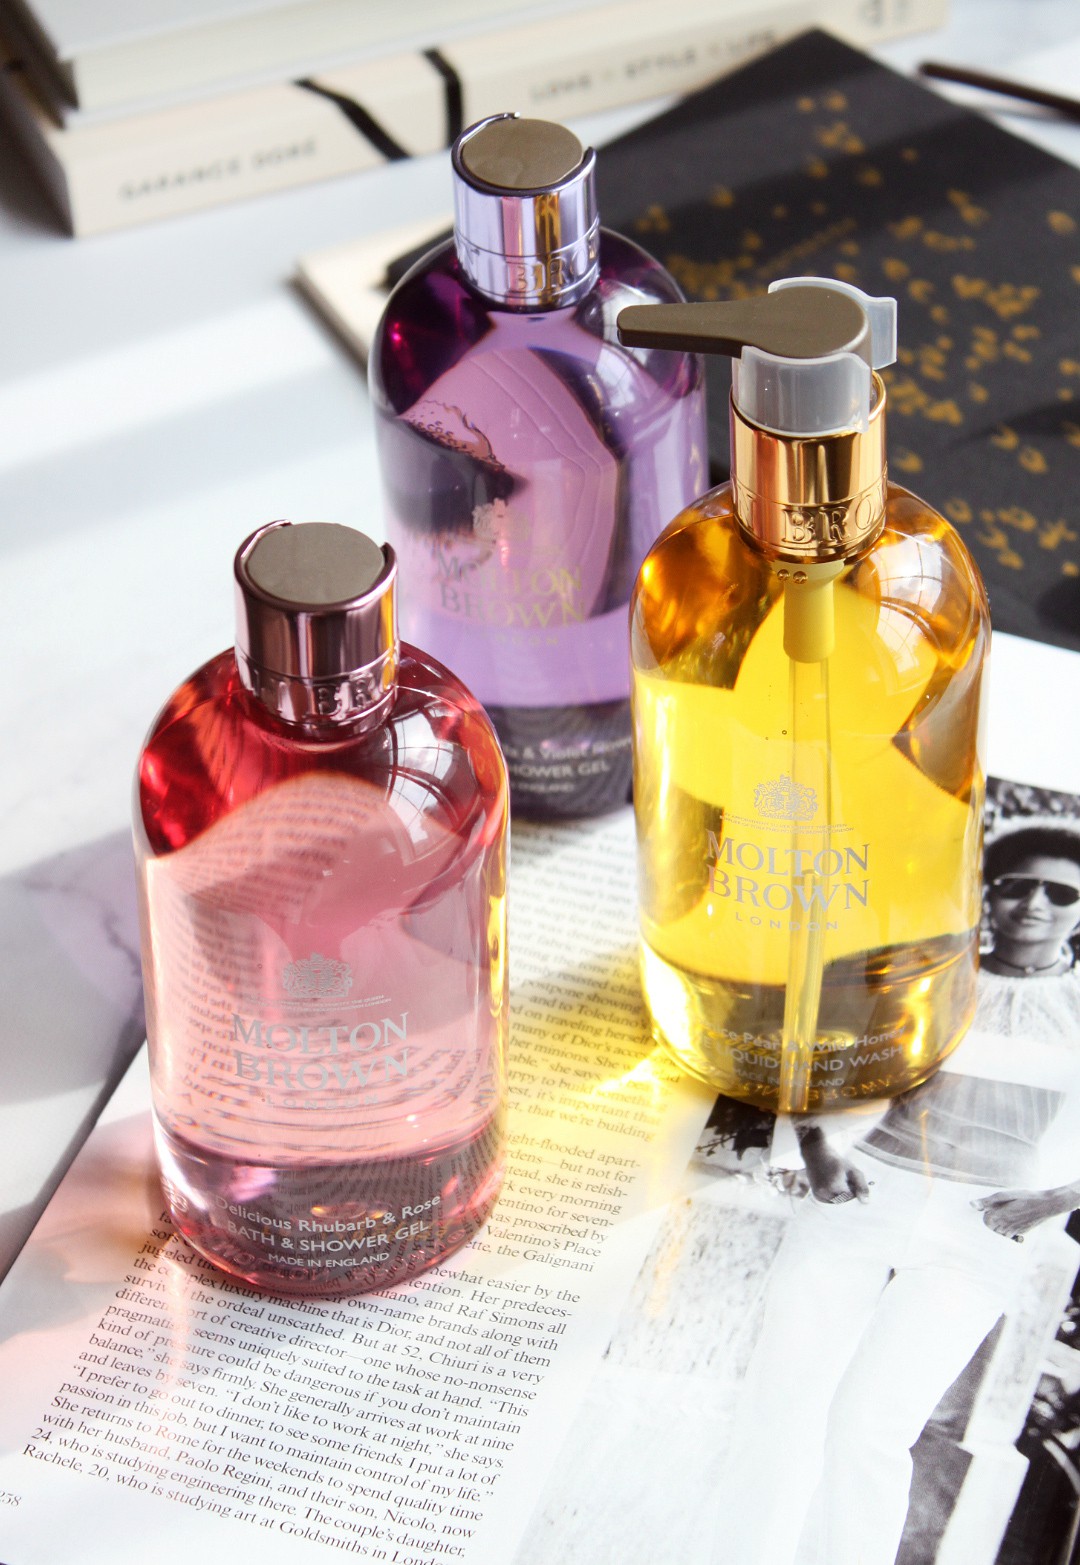 Molton Brown The Patisserie Parlour Collections: Delicious Rhubarb & Rose, Comice Pear & Wild Honey, and Exquisite Vanilla & Violet Flower